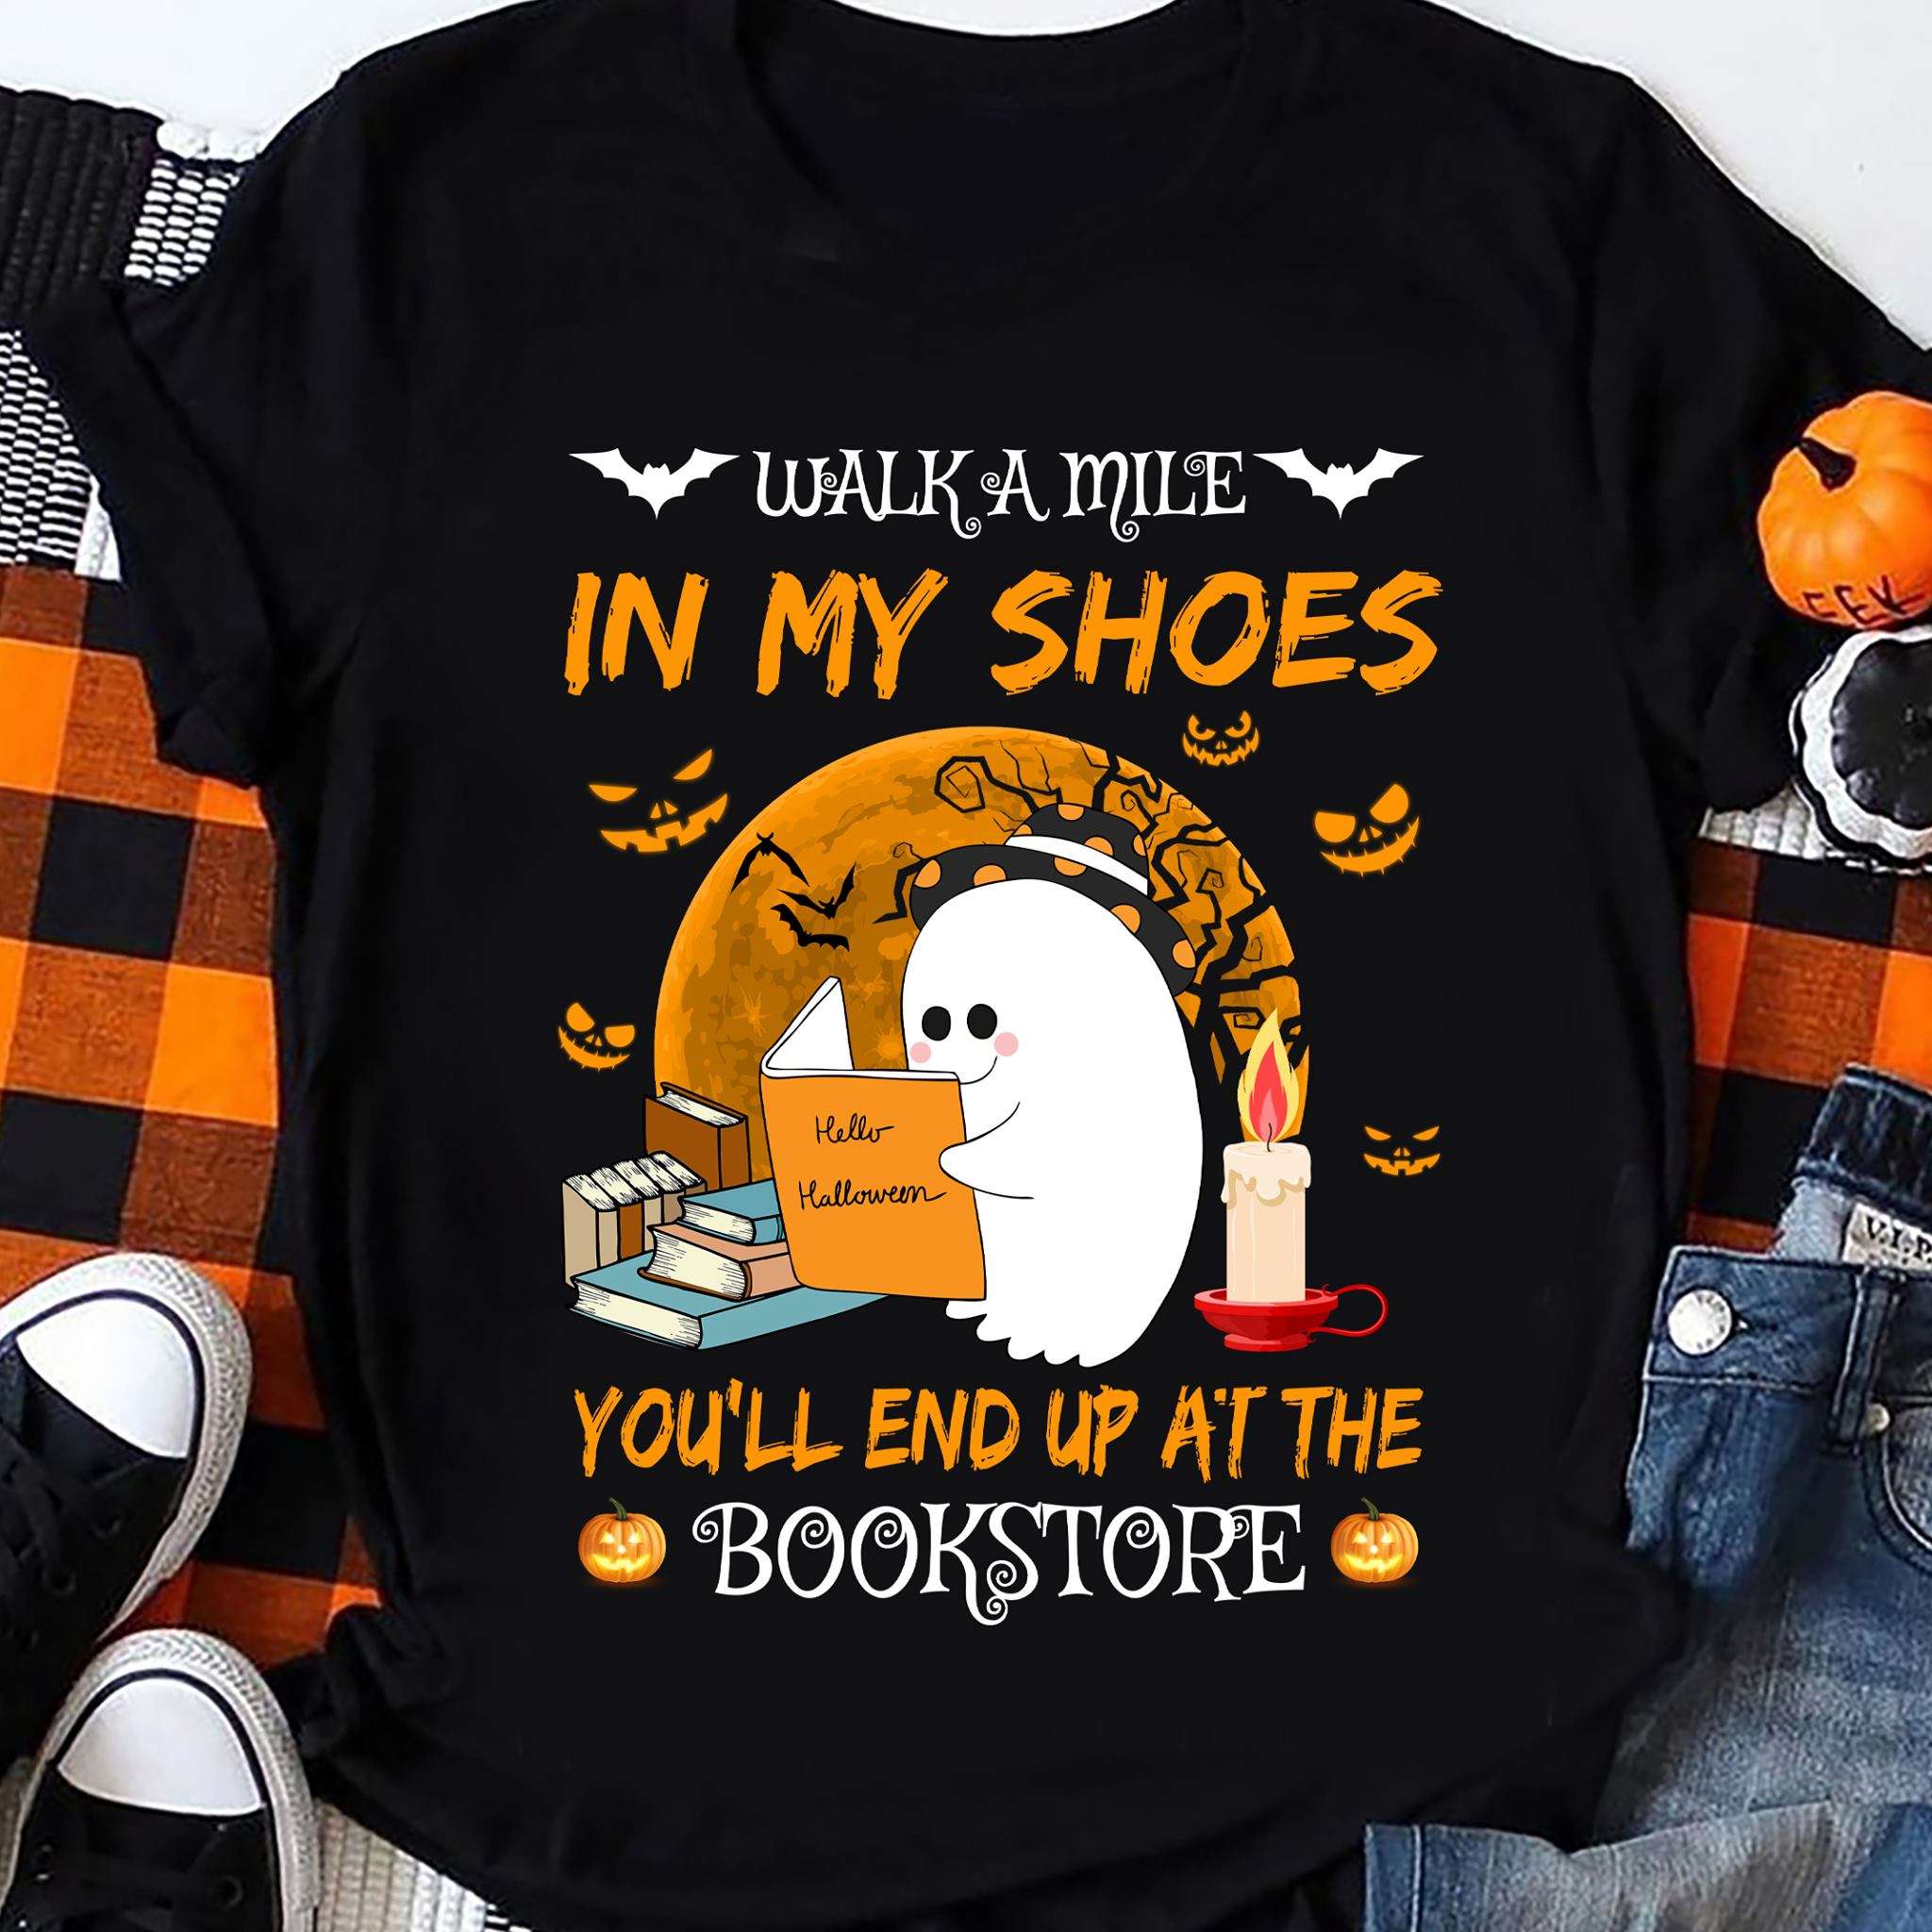 Walk a mile in my shoes, you'll end up at the bookstore - White boo reading books, Halloween gift for bookaholic